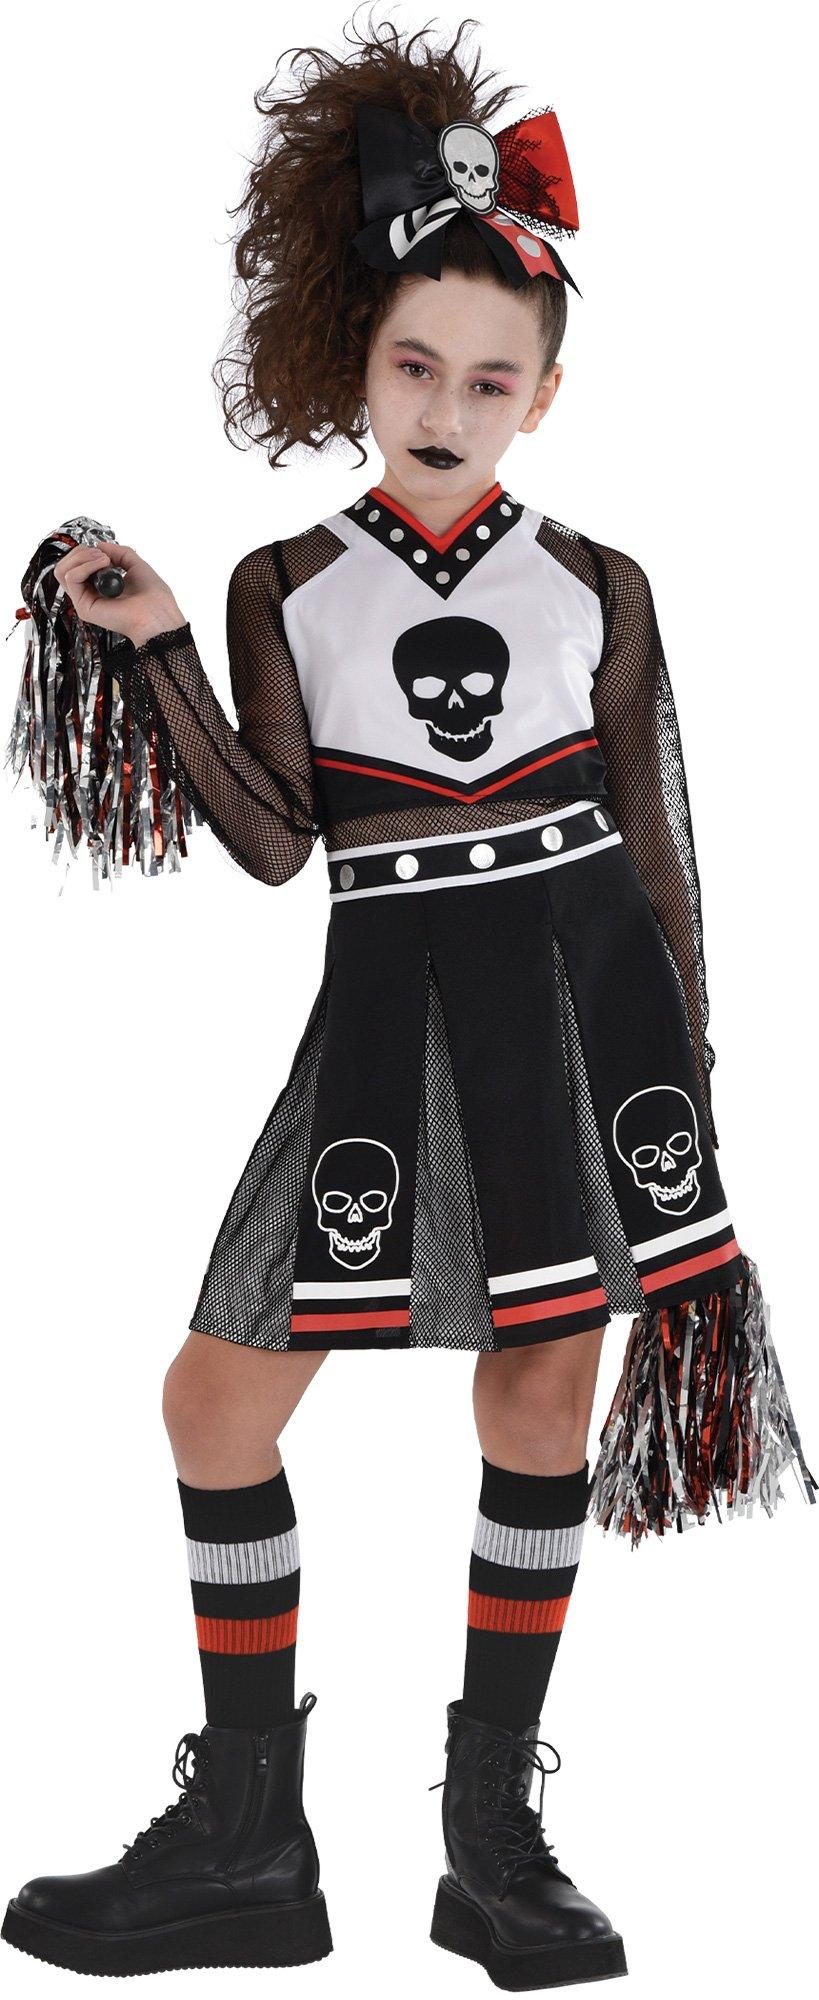 Plus Size Cheerleading Uniforms For Women Adult Cheerleader Outfit With Pom  Poms For Dress Up Party Sport Games